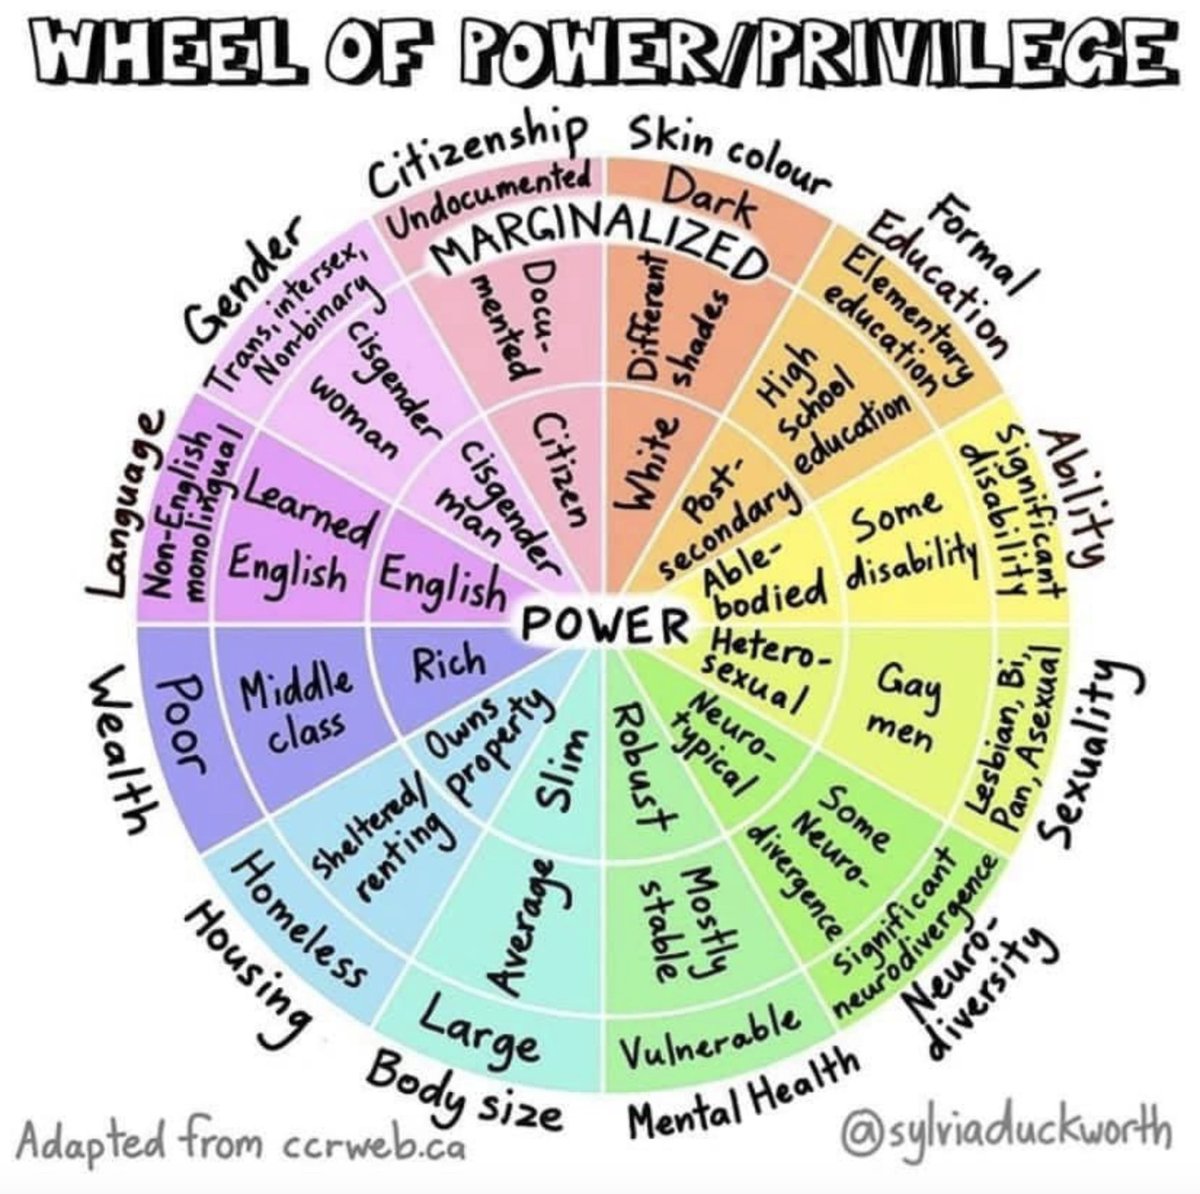 Dr. Chris Simpson on Twitter: "The wheel of power/privilege. It is the  responsibility of those of us with power and privilege to help to dismantle  this structure. #equity. I will work to